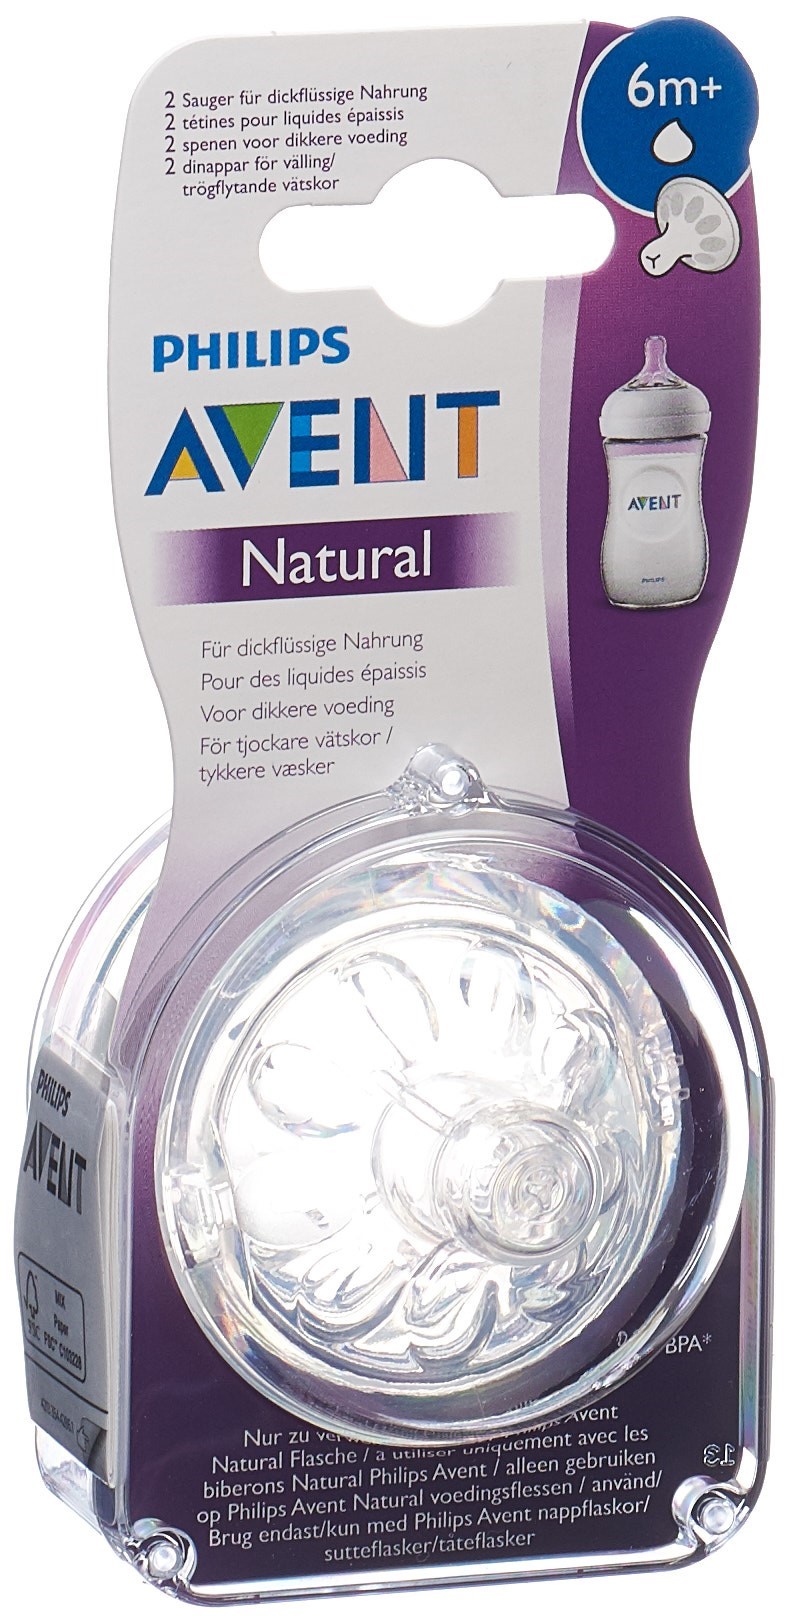 PHILIPS AVENT Natural Sauger 6M+ 2 Stk